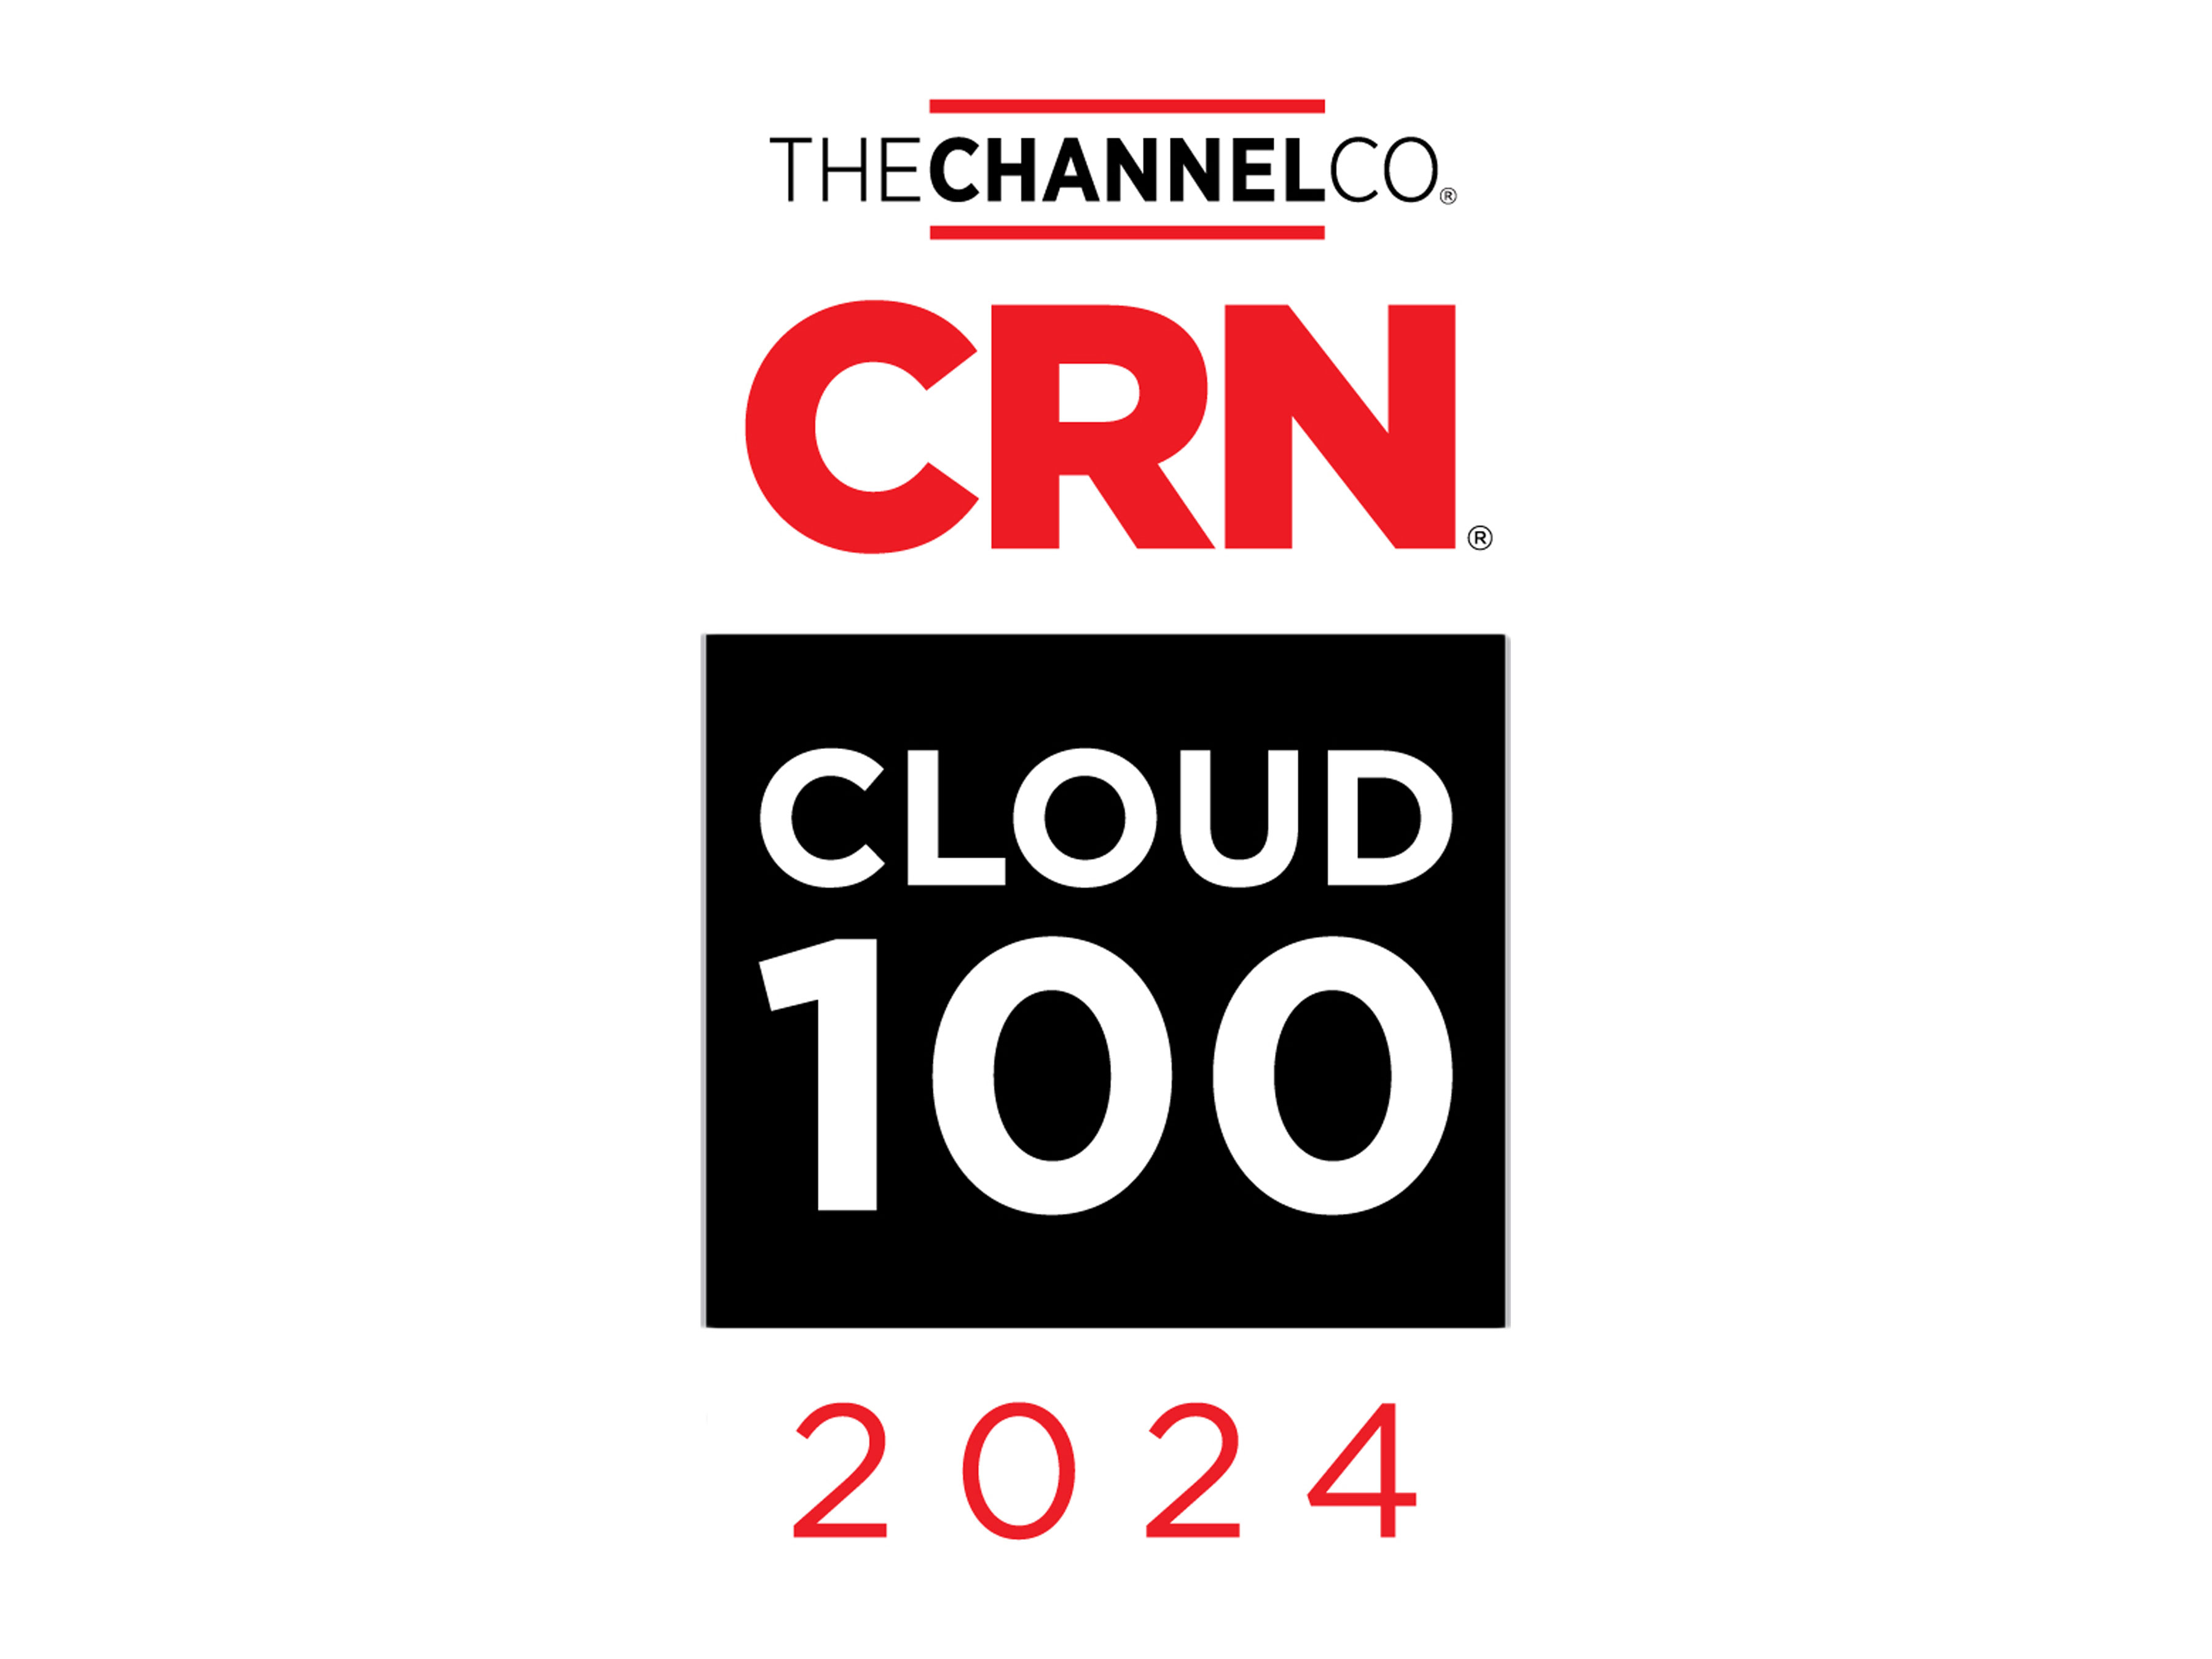 Zebra Technologies Makes CRN Cloud 100 List for Commitment to Channel and Innovation